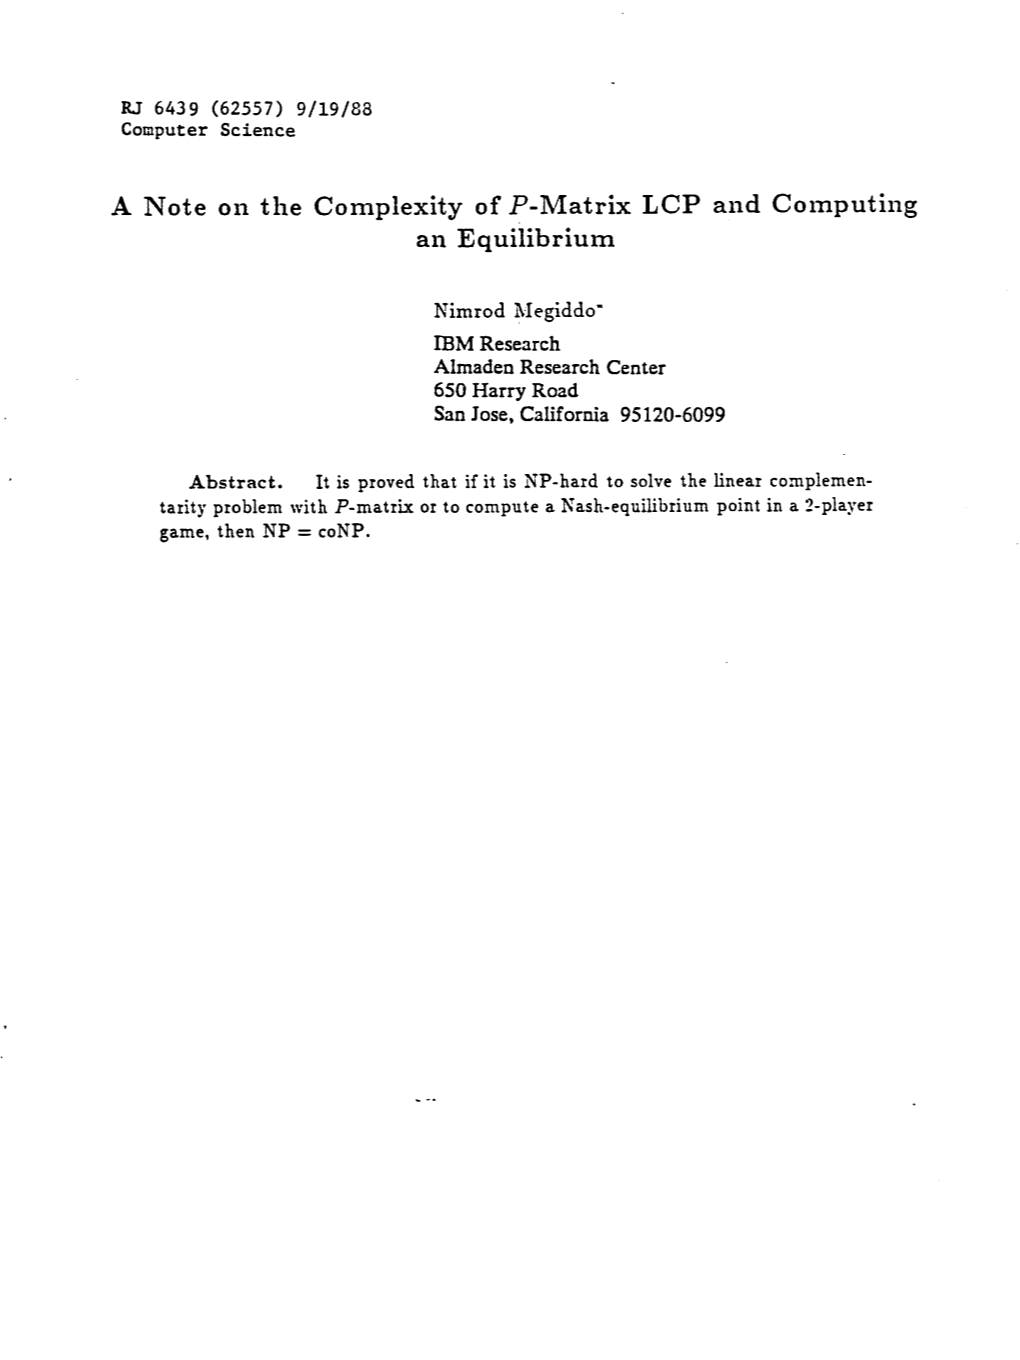 A Note on the Complexity of P-Matrix LCP and Computillg an Equilibrium